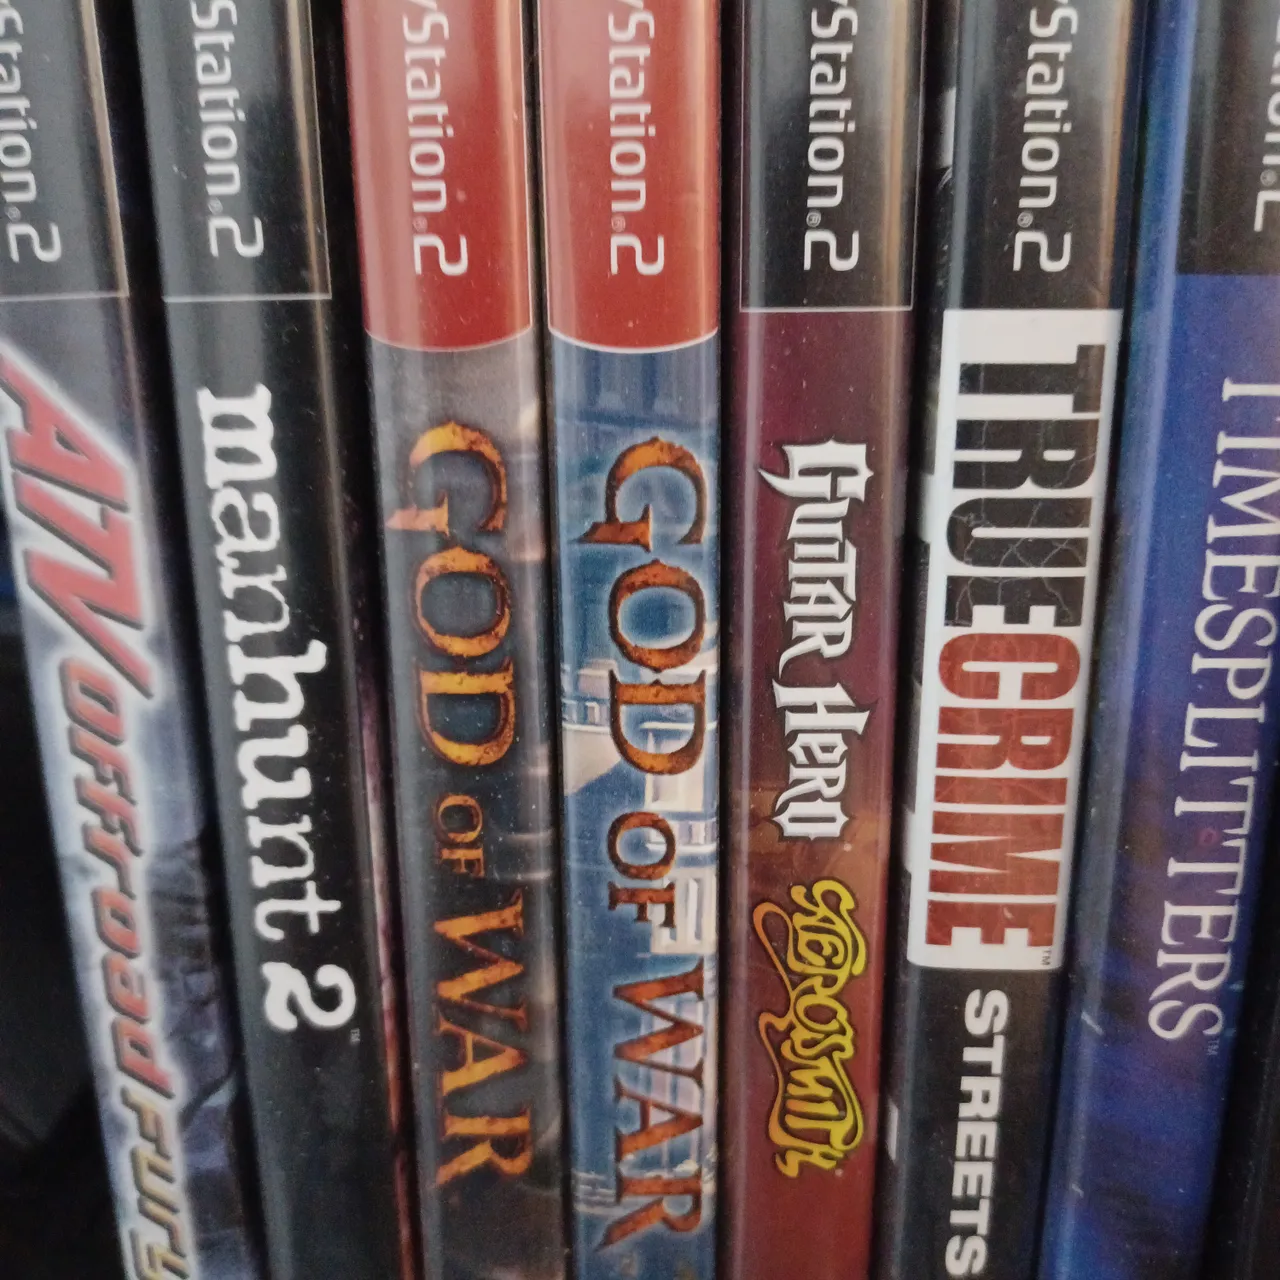 PS2 games photo 1